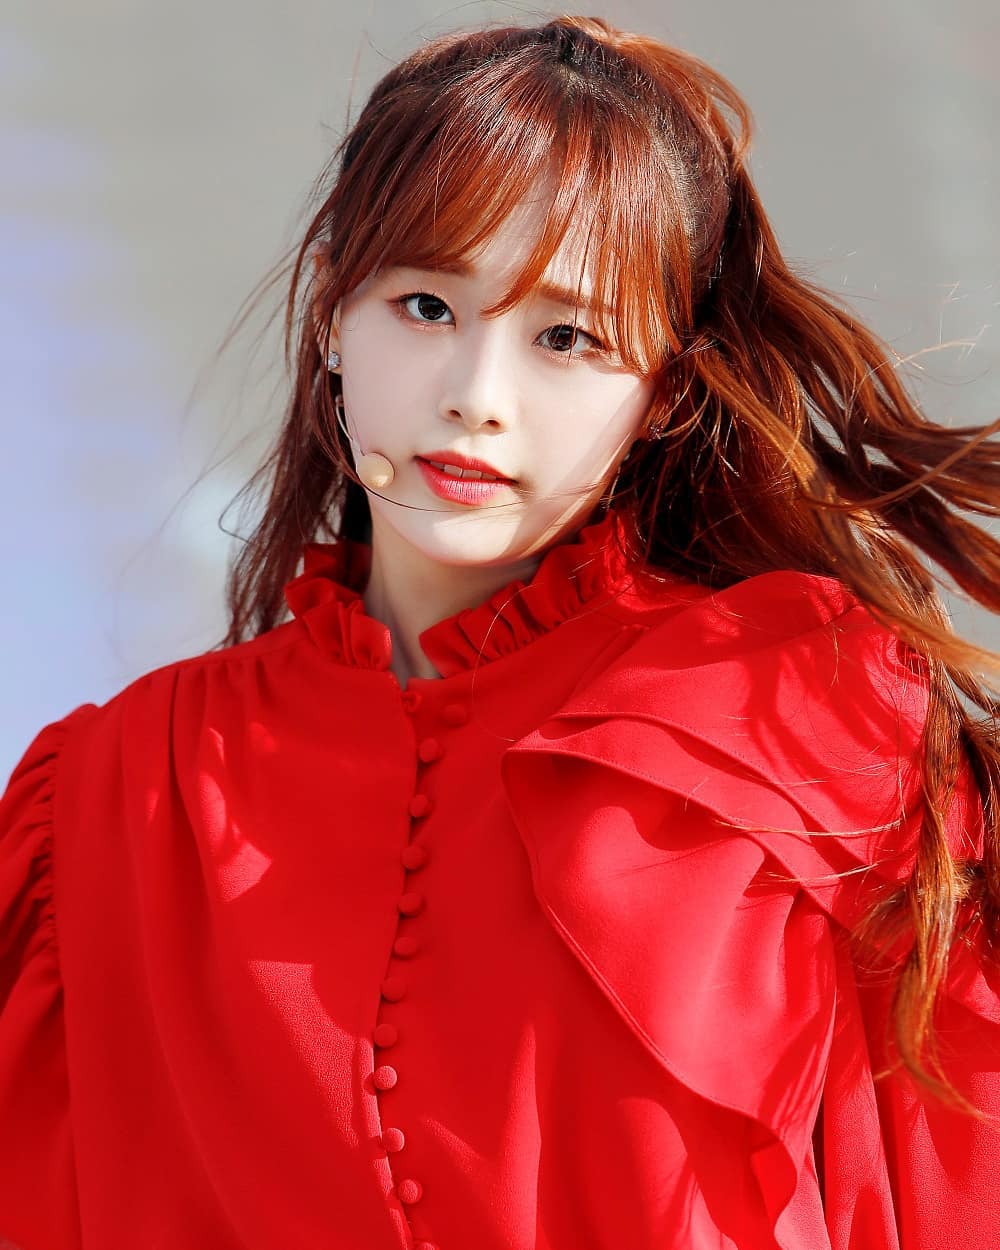 Chuu Singer Biography, Wikipedia, Height, Age, Family, Instagram, Networth